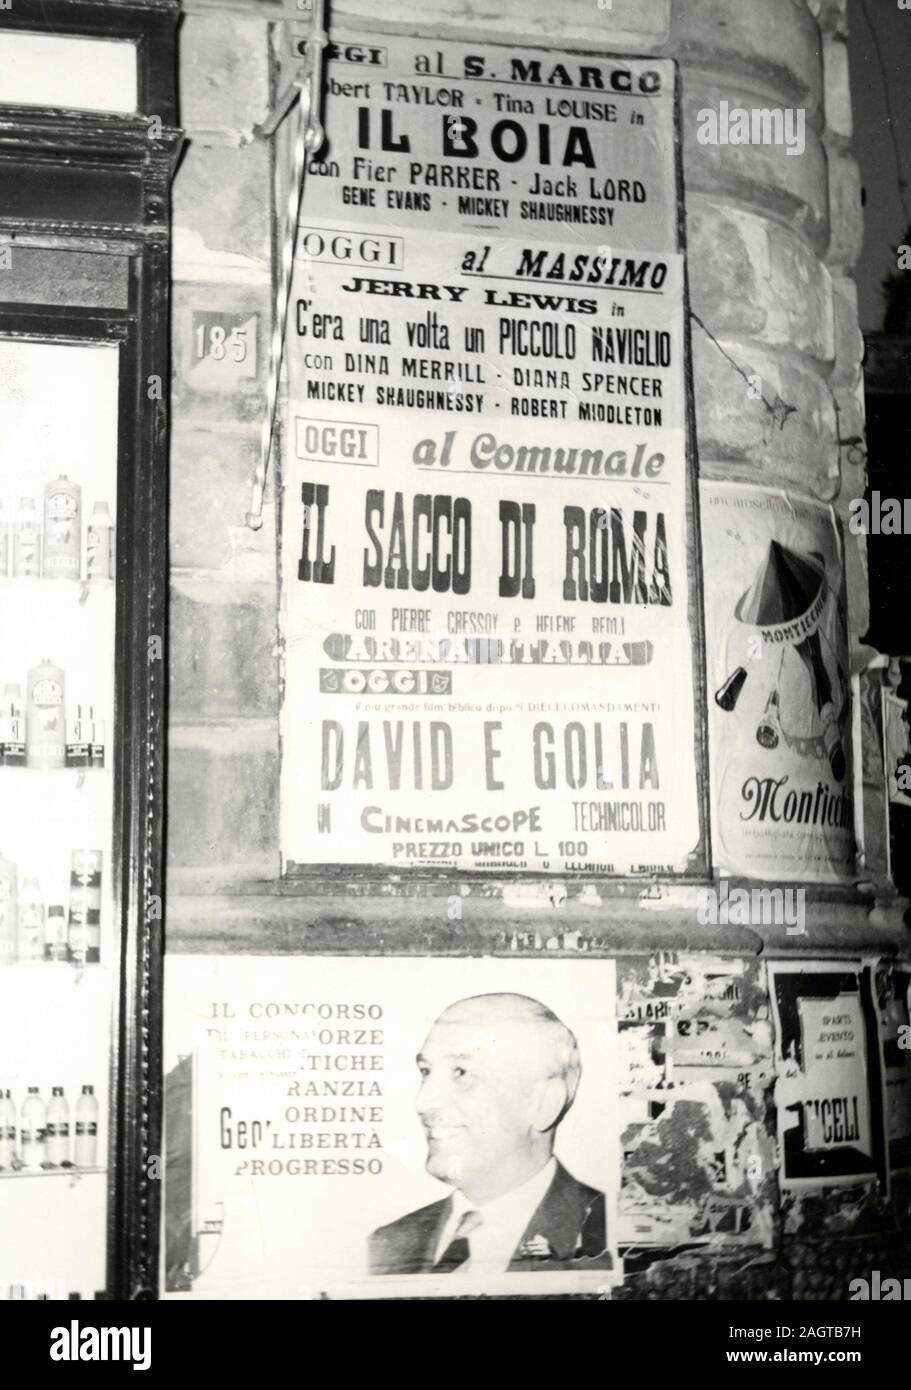 Cinema posters on the wall, Italy 1950s Stock Photo